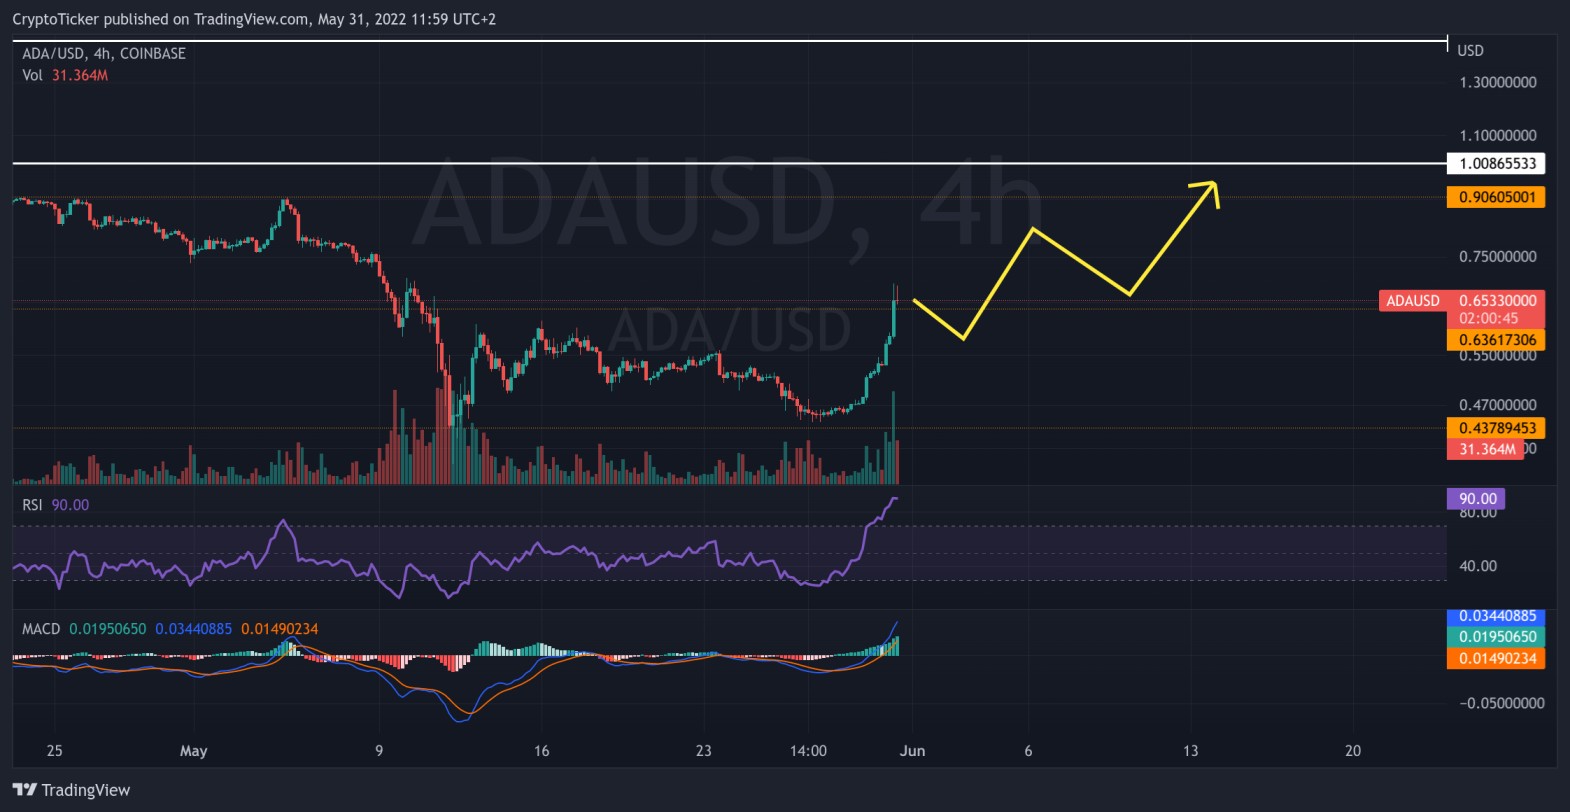 ADA/USD 4-hours chart showing the potential path of ADA reaching 1$